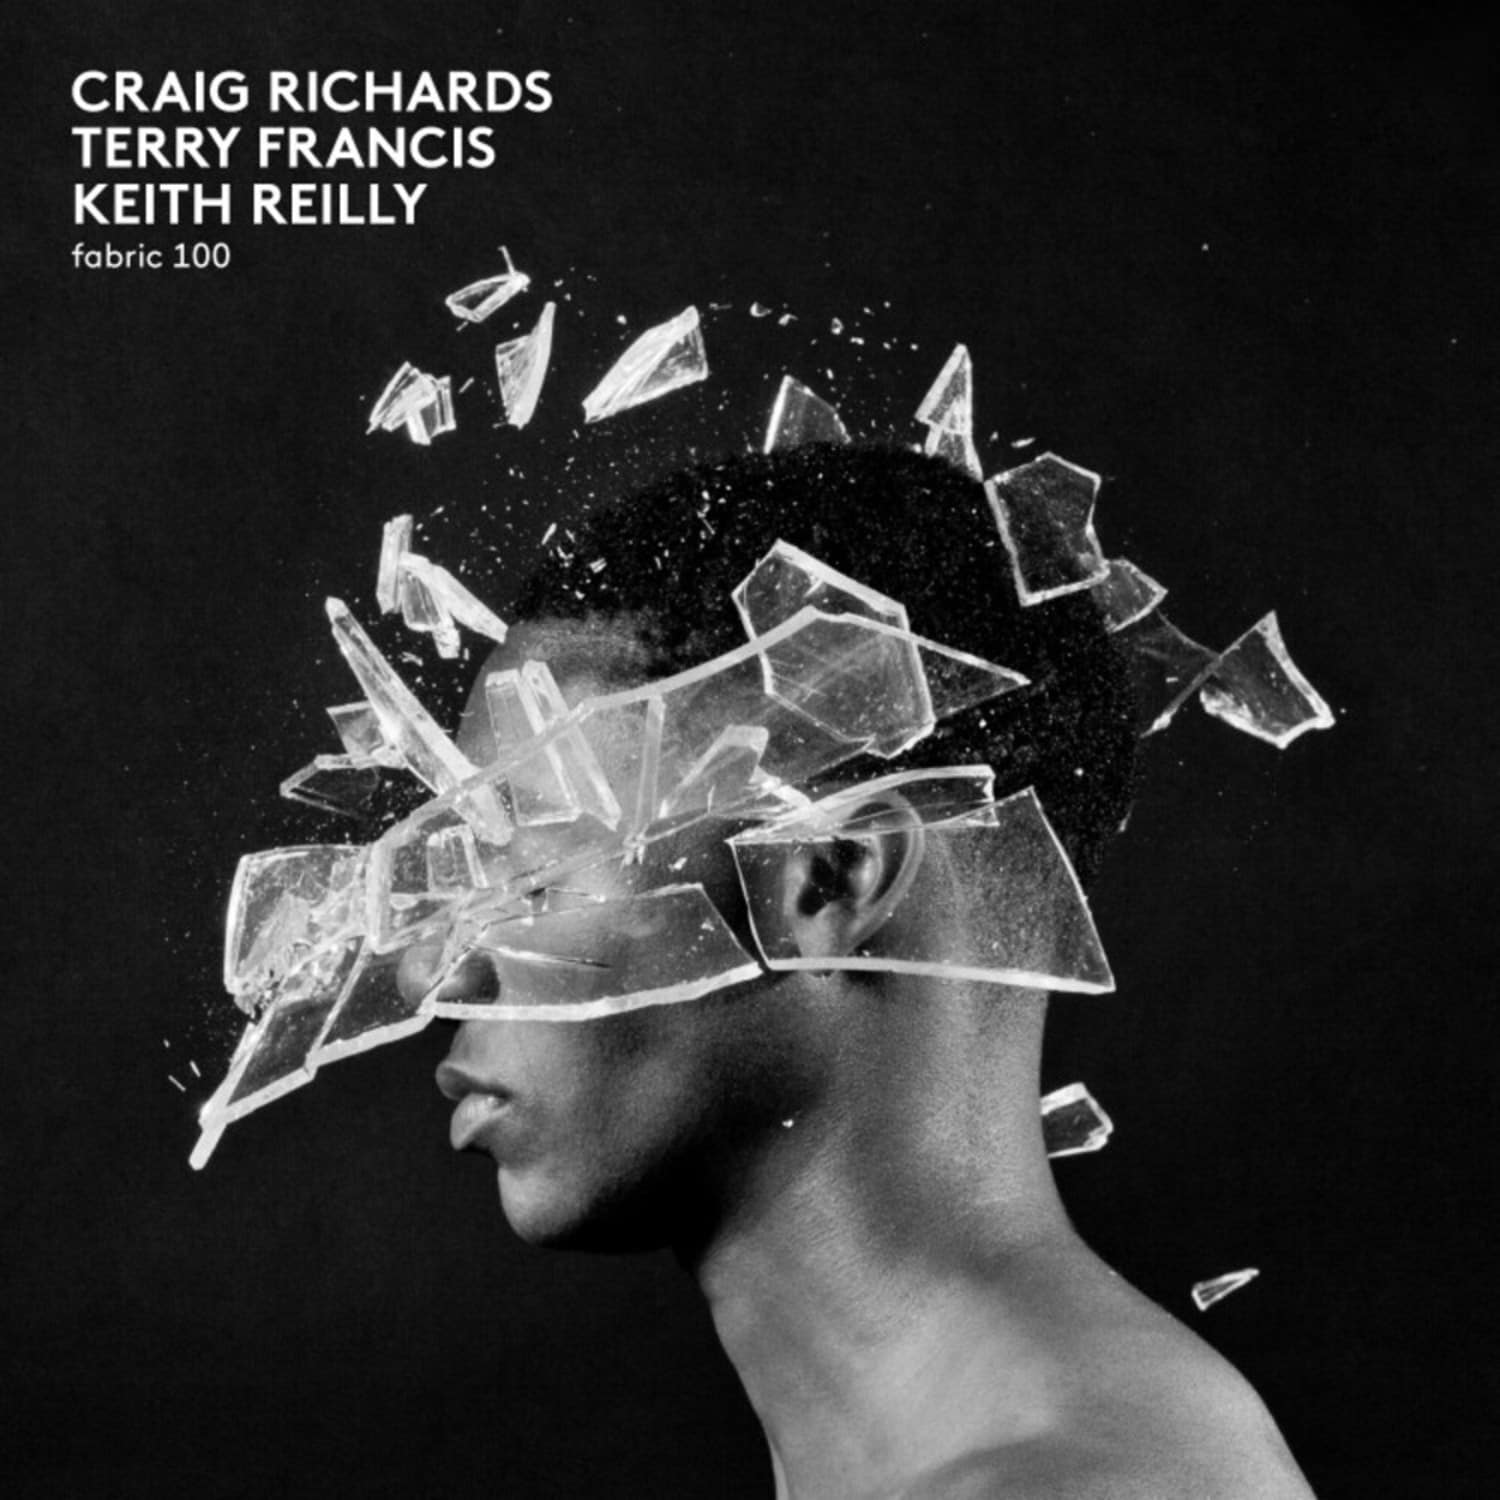 Craig Richards, Terry Francis, Keith Reilly - FABRIC 100 